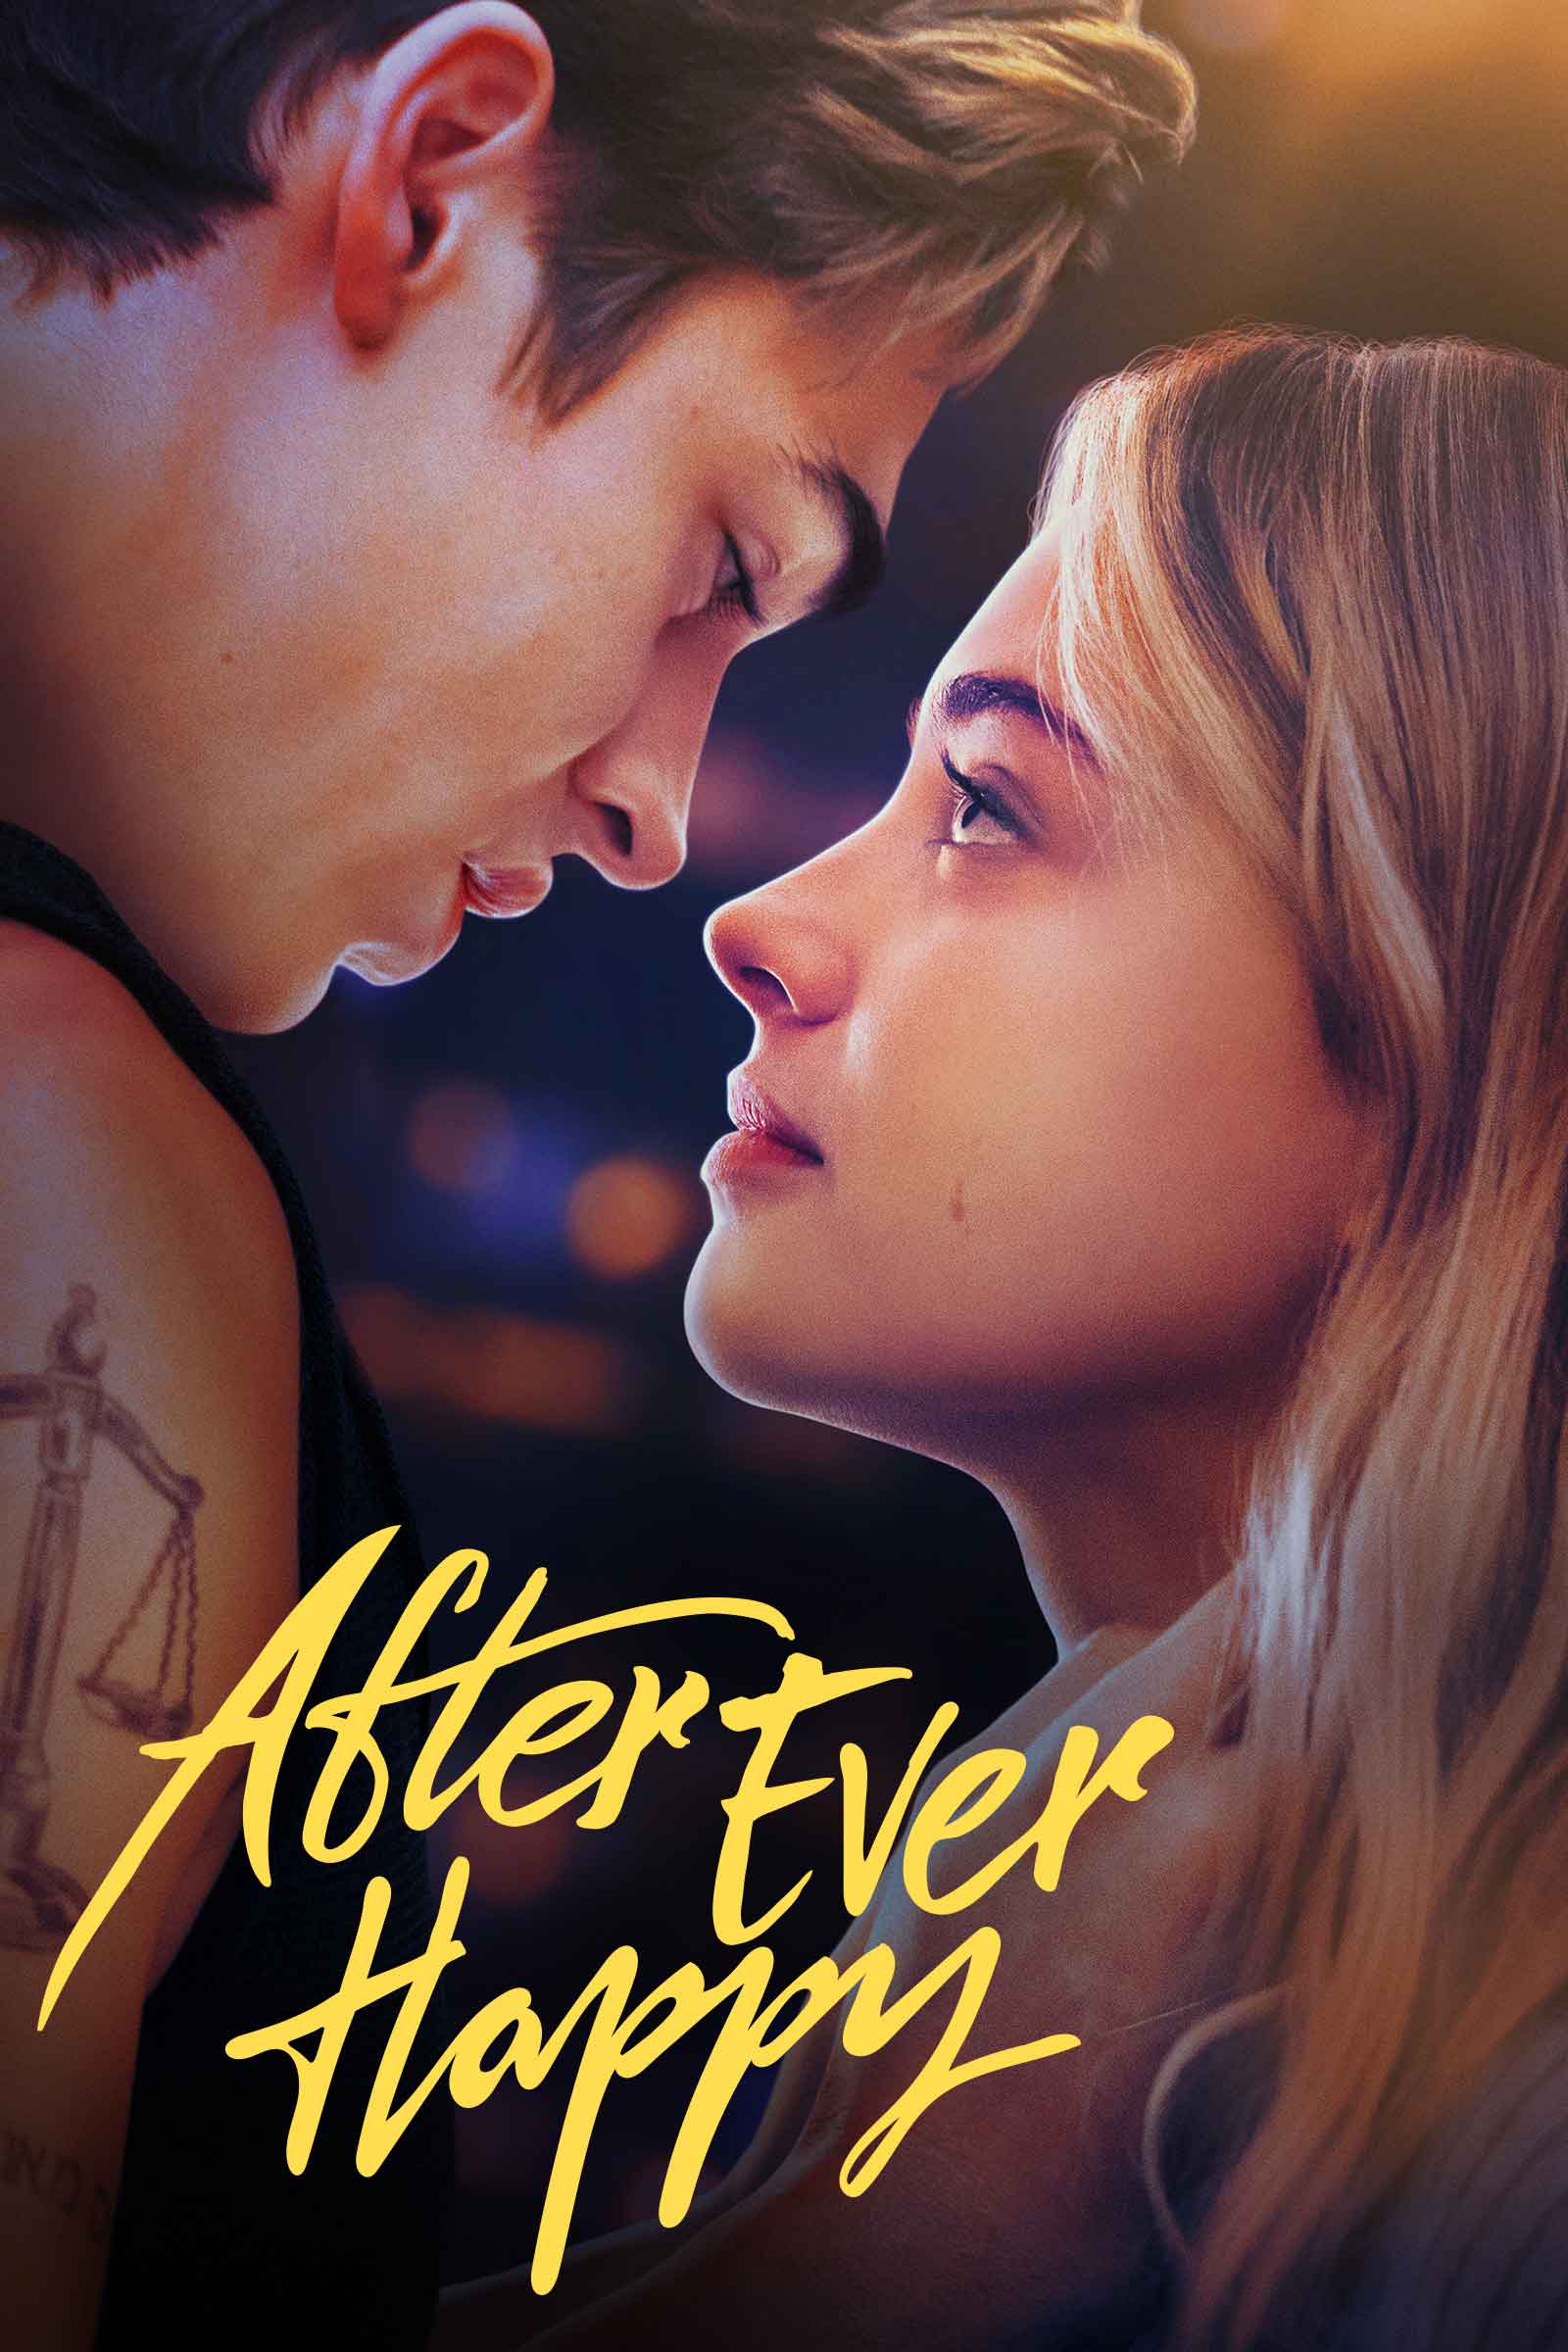 After [DVD]